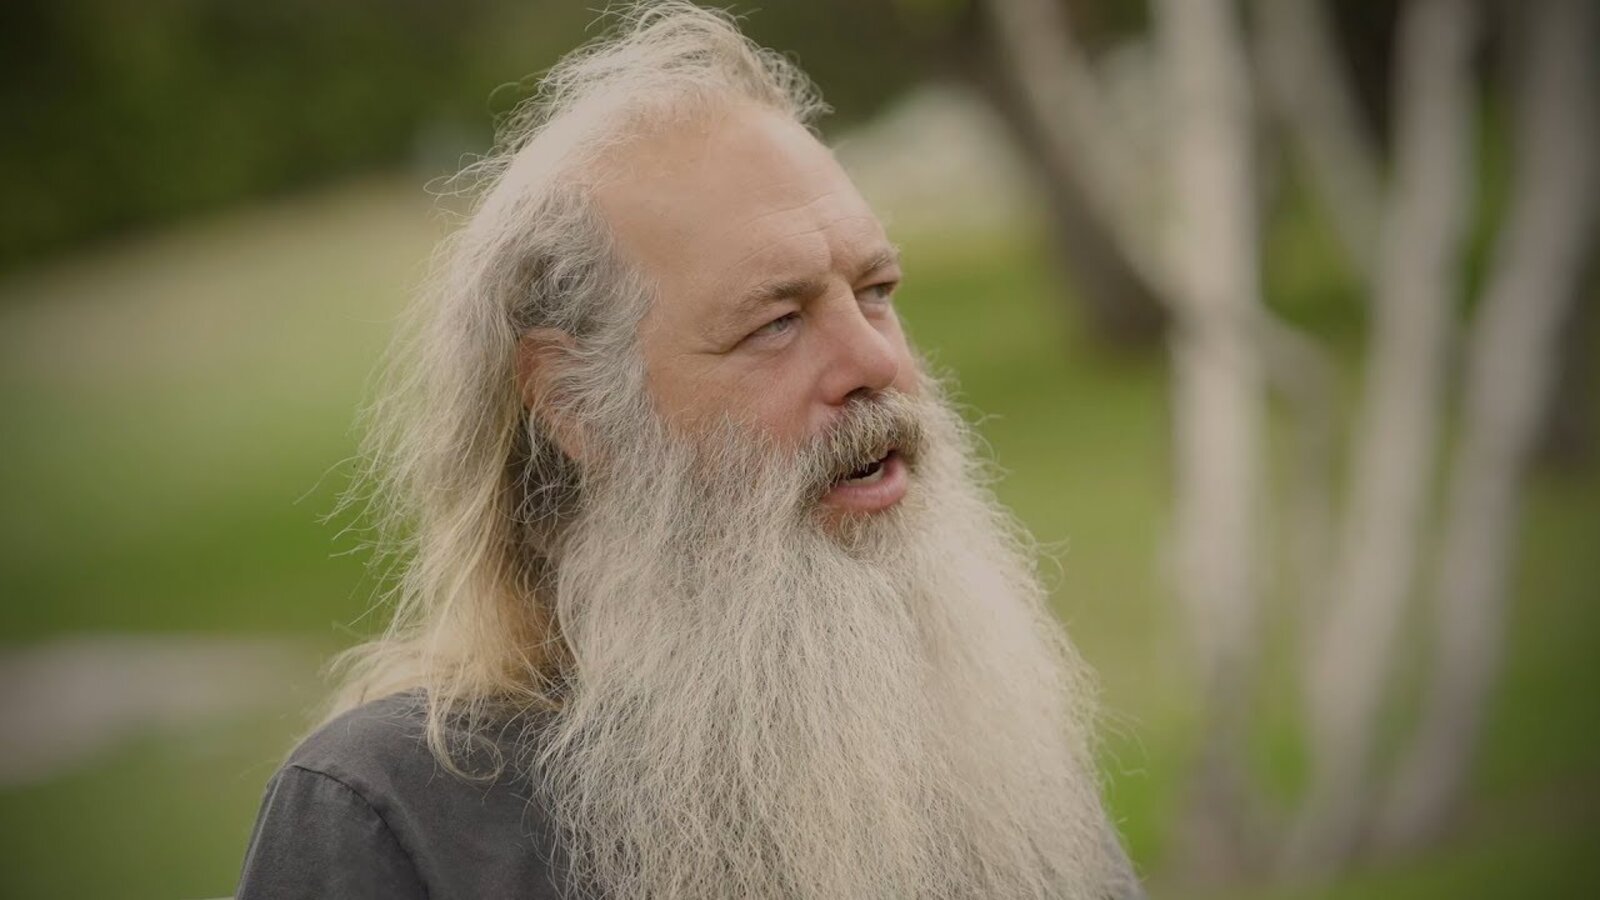 The Top 10 Albums That Rick Rubin Listed As His Favorites